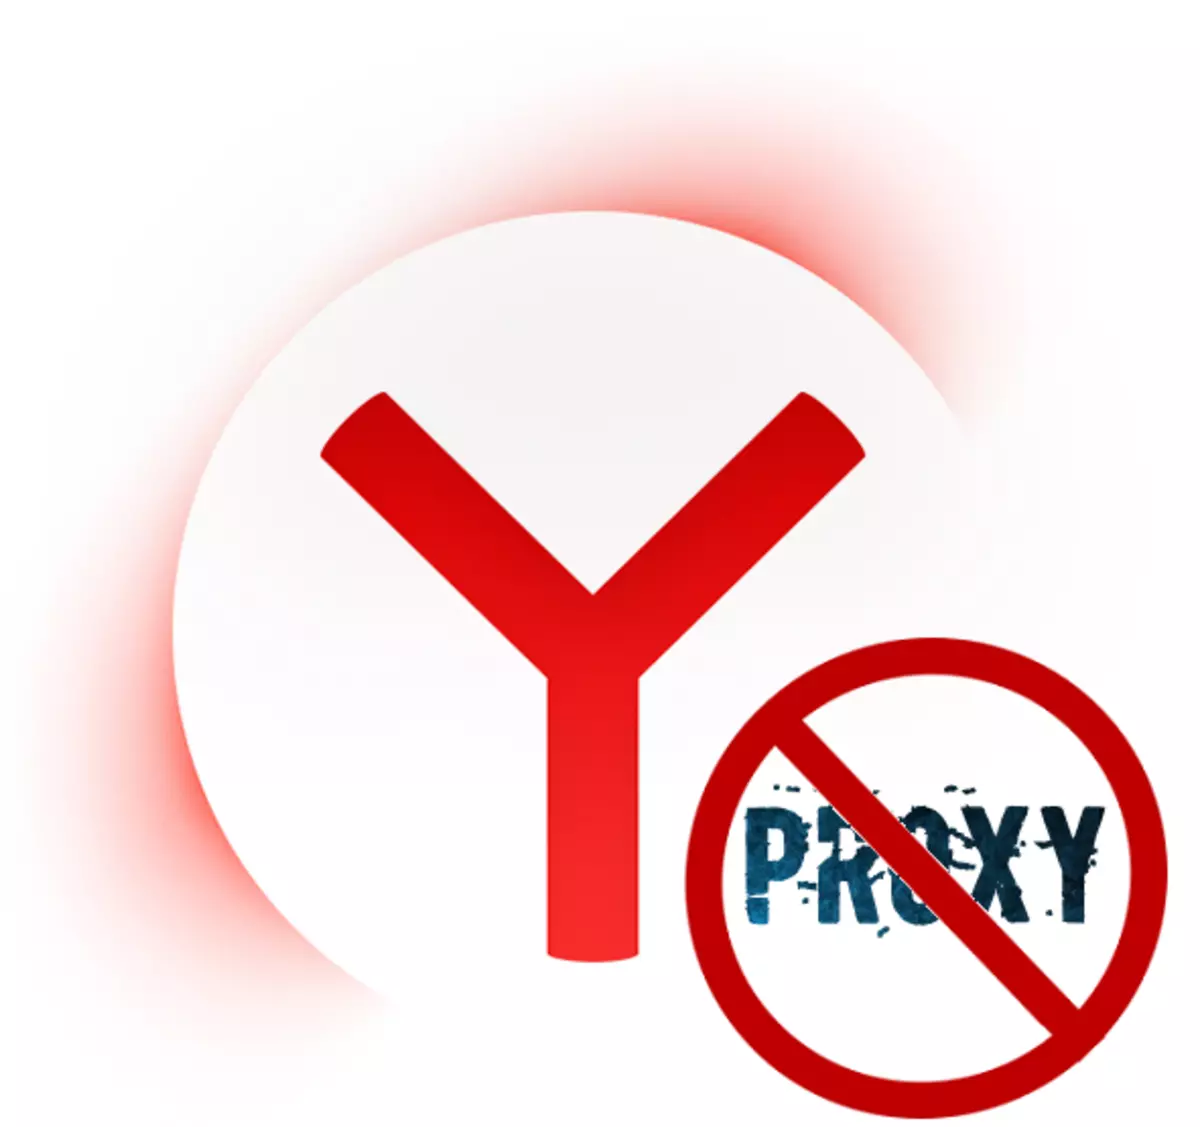 How to disable proxy server in Yandex browser